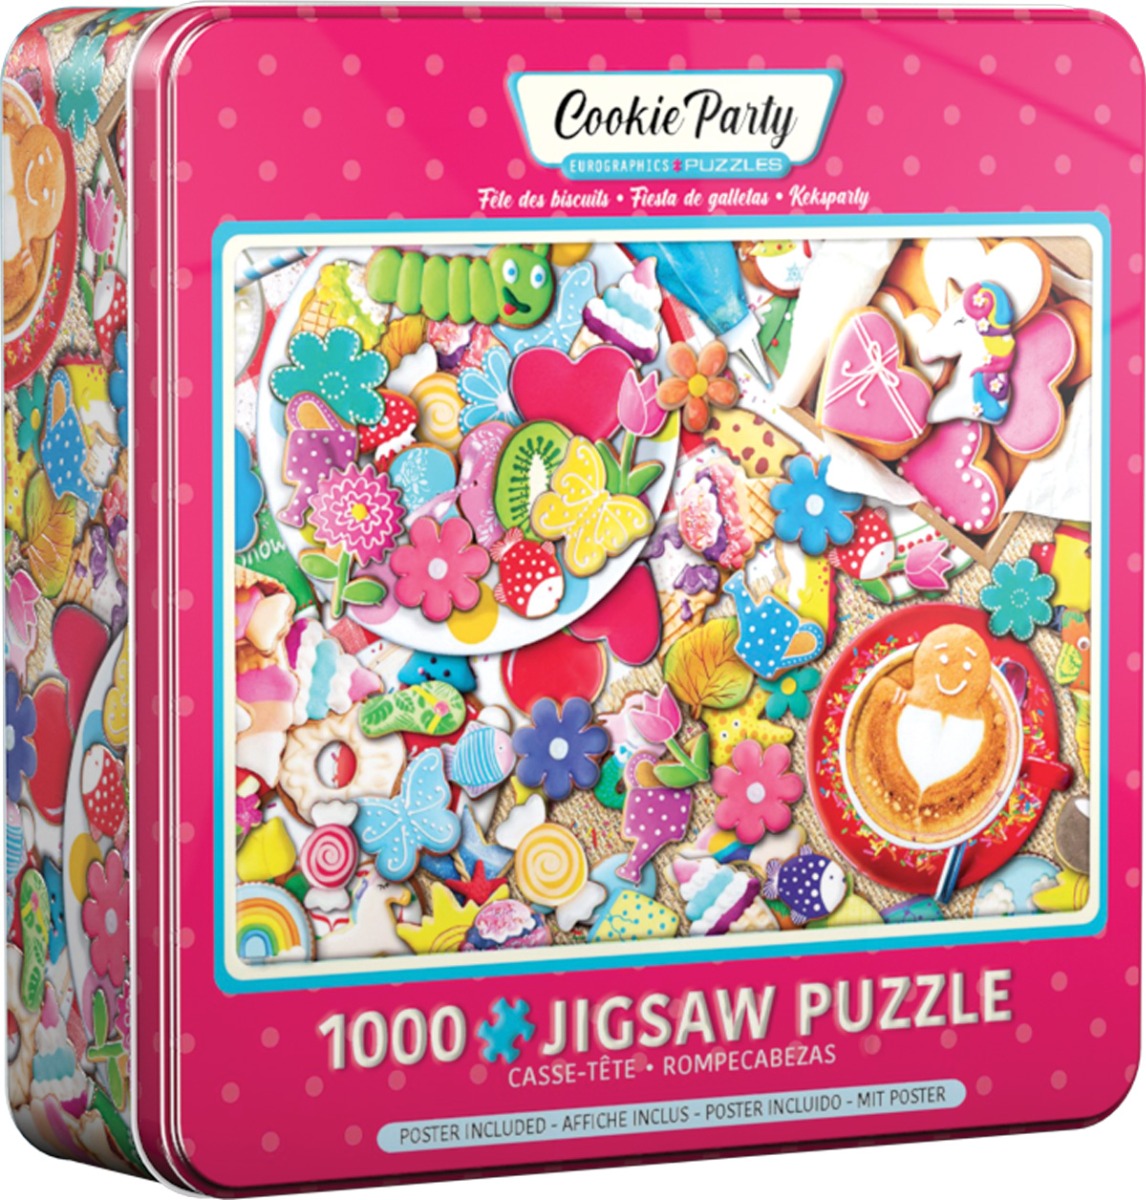 Eurographics - Tin Box - Cookie Party - 1000 Piece Jigsaw Puzzle